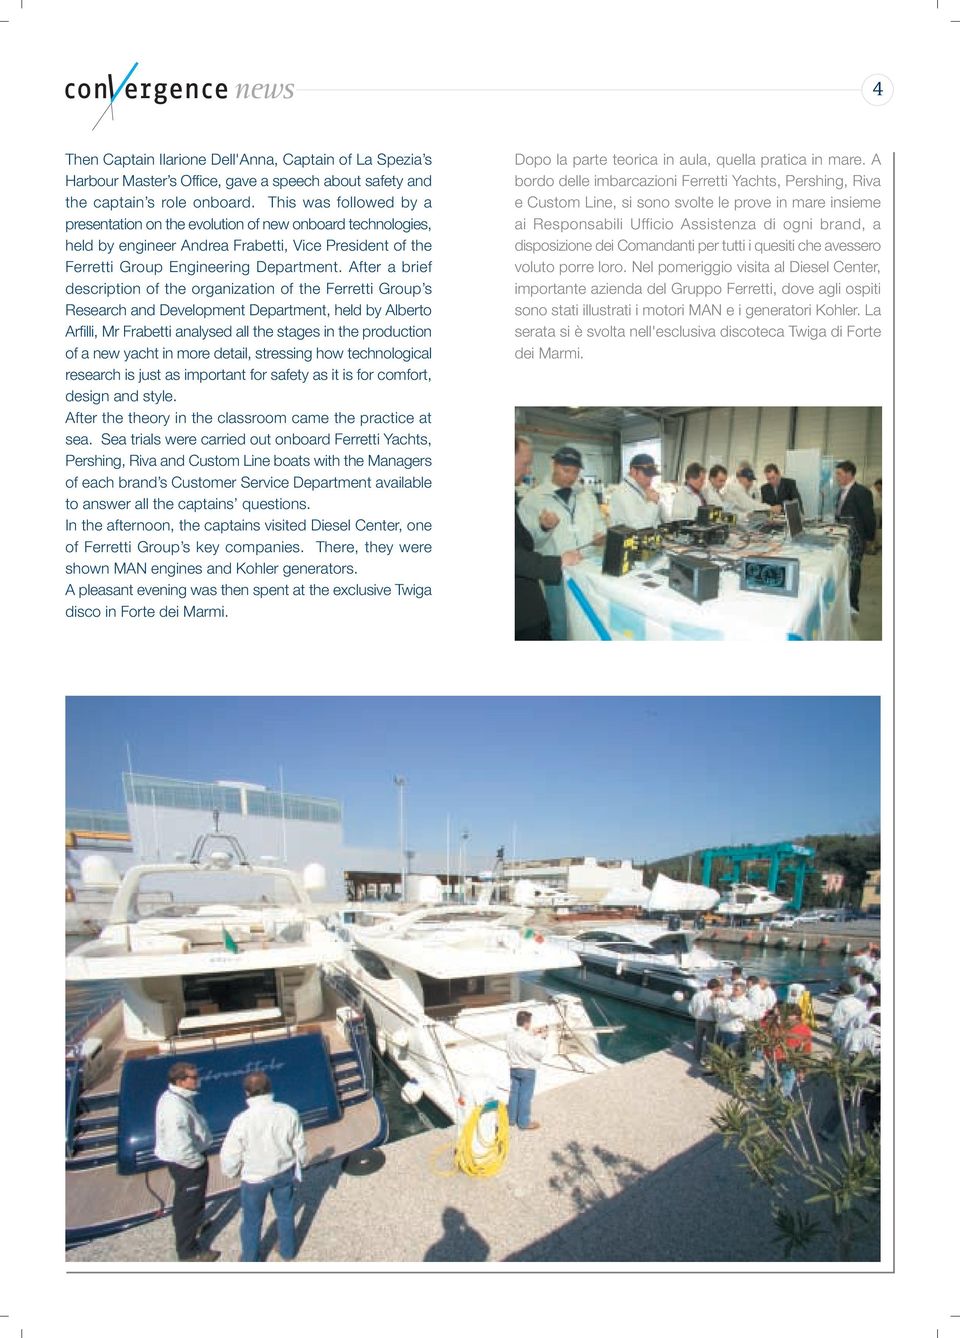 After a brief description of the organization of the Ferretti Group s Research and Development Department, held by Alberto Arfilli, Mr Frabetti analysed all the stages in the production of a new